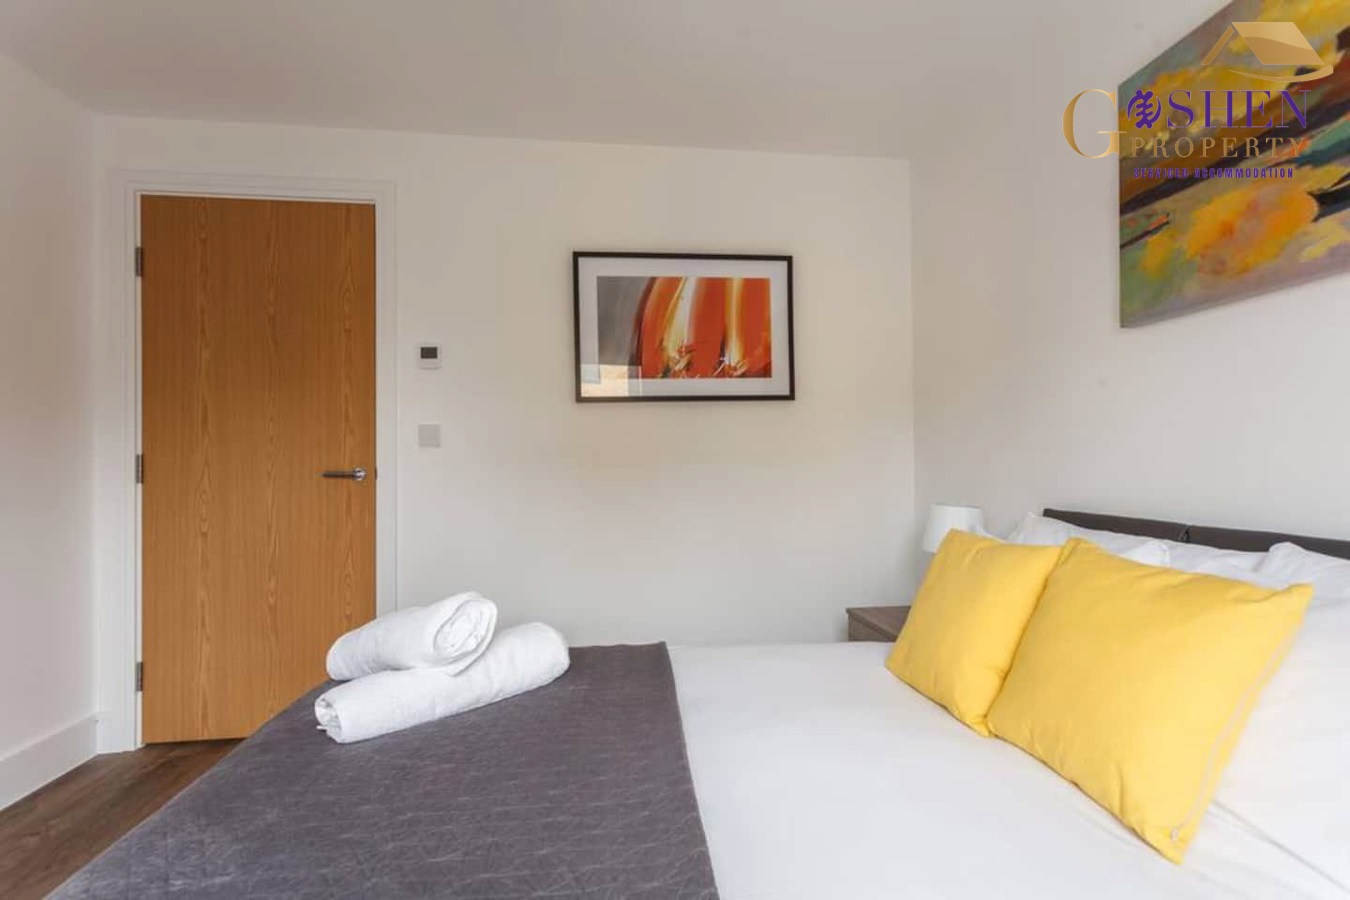 Goshen Serviced Accommodation Apartments 19 Deanery Court - Bedroom